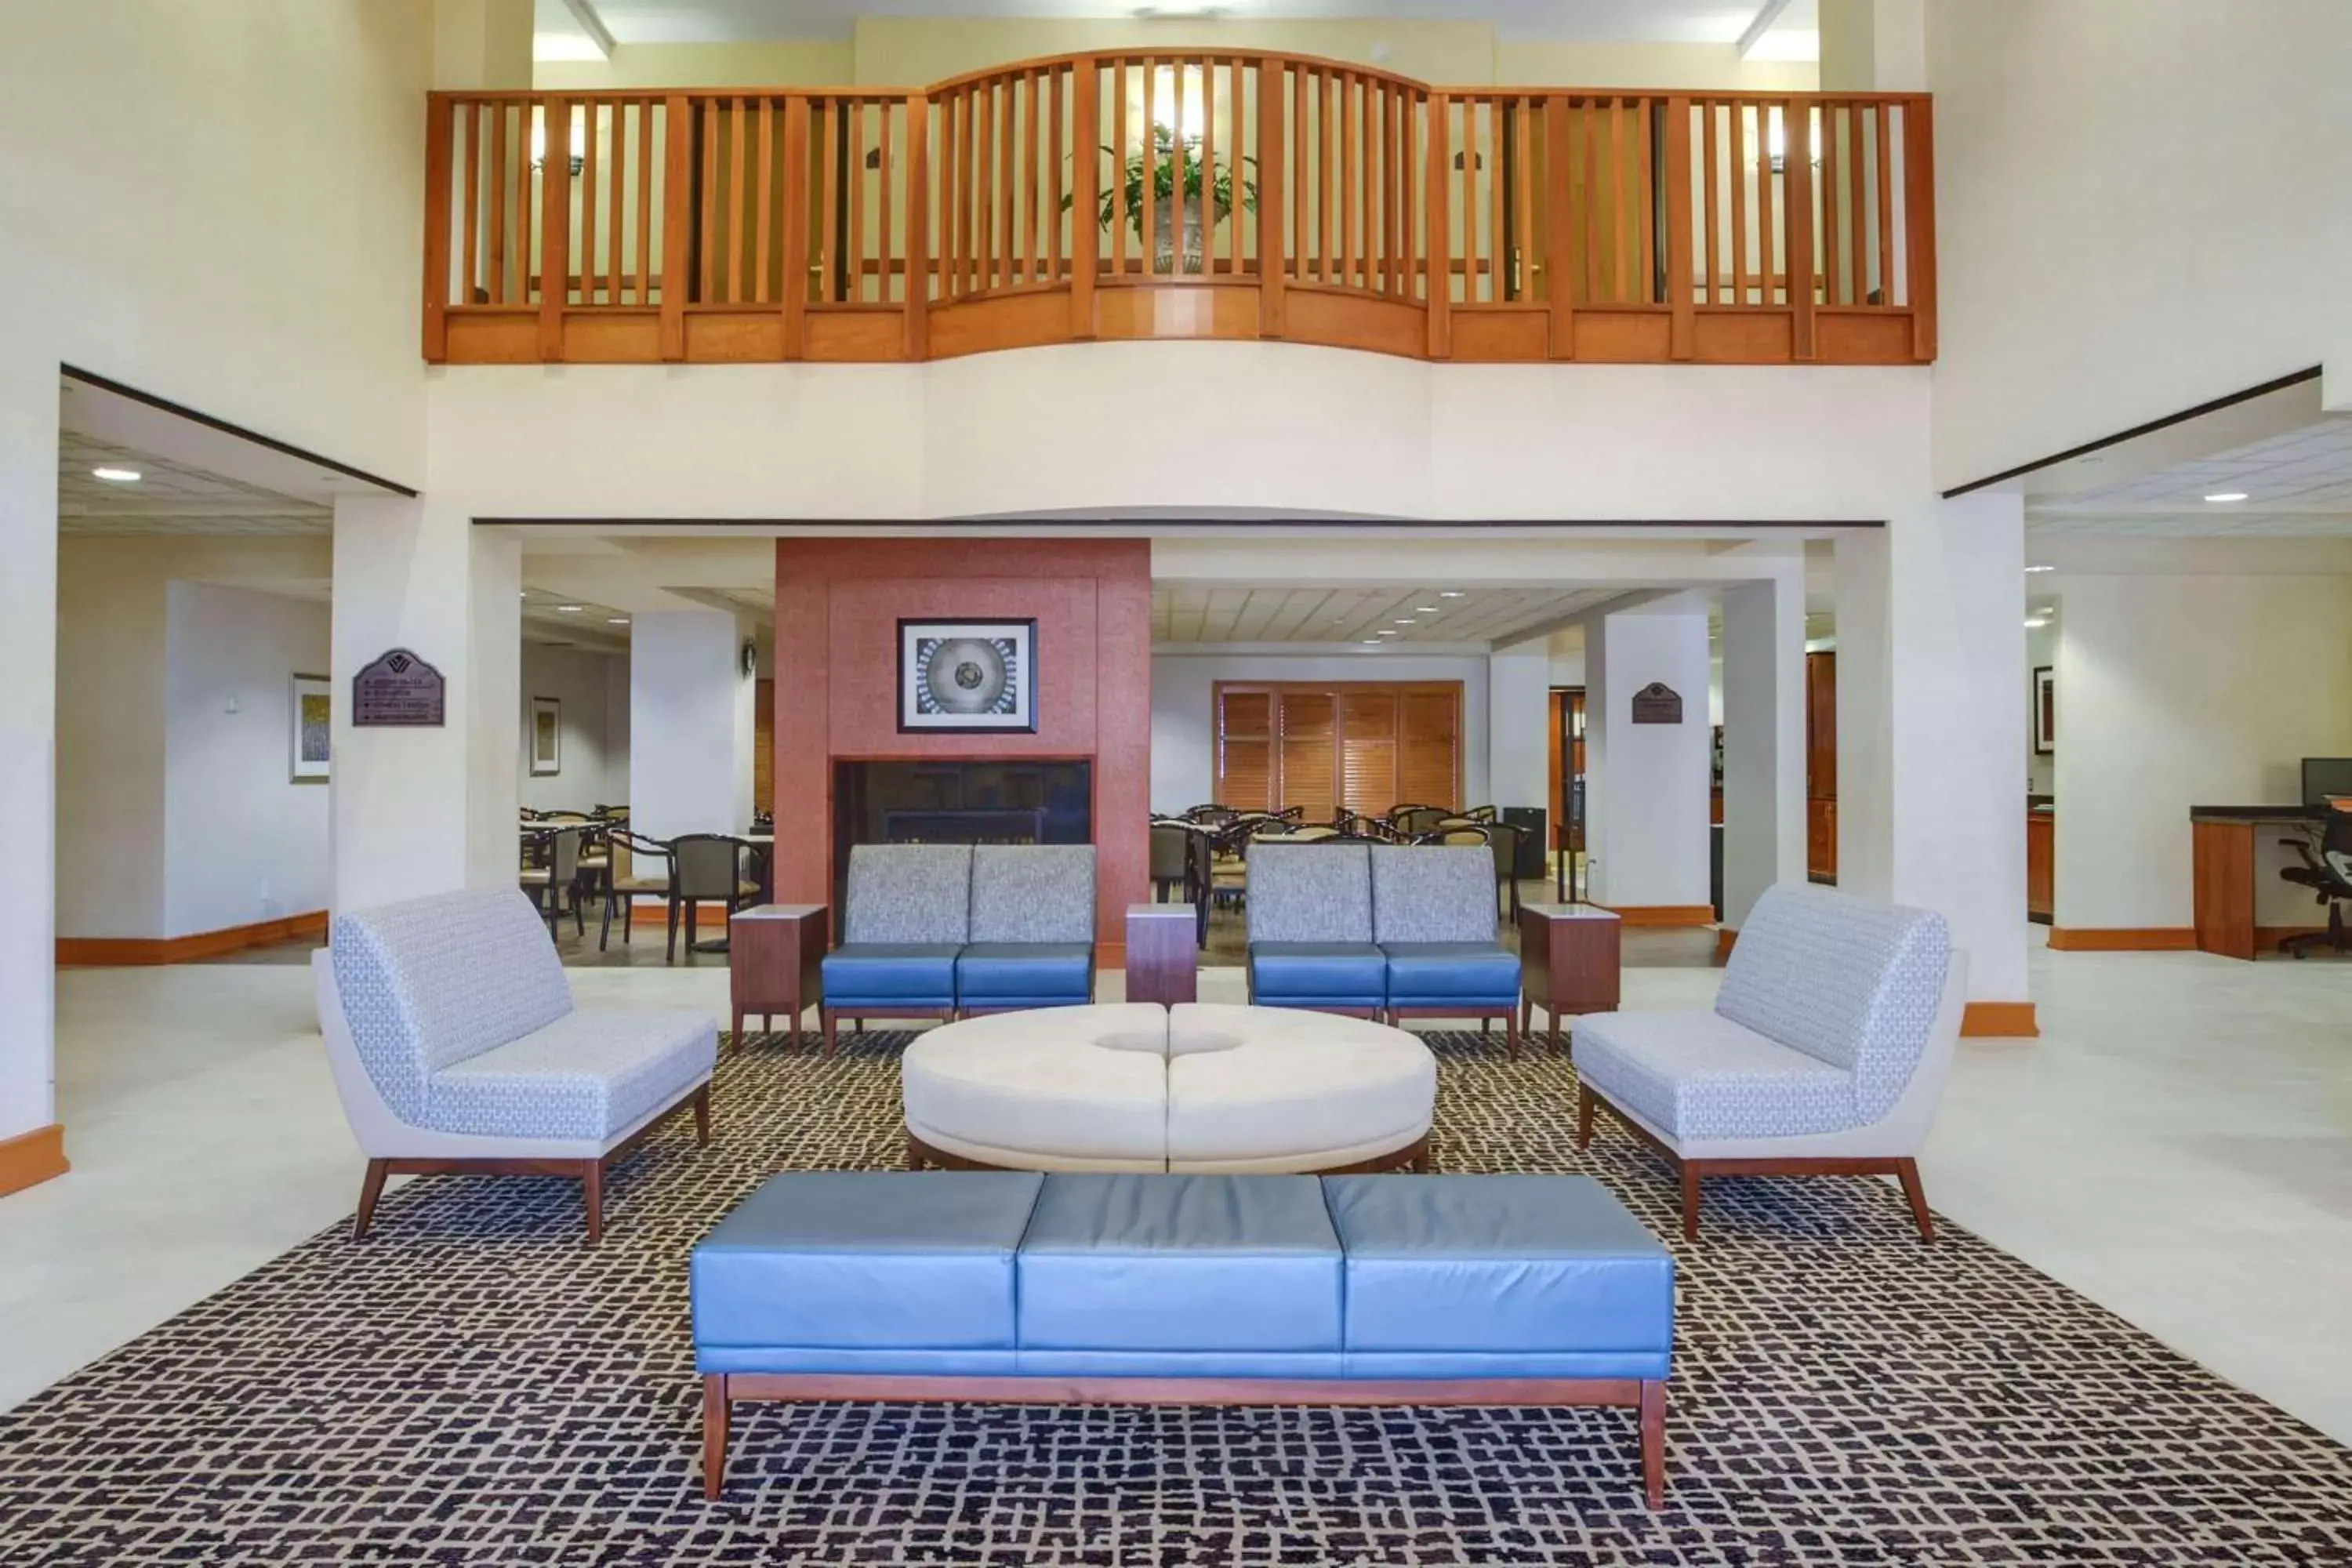 Lobby or reception in Wingate by Wyndham - Dulles International